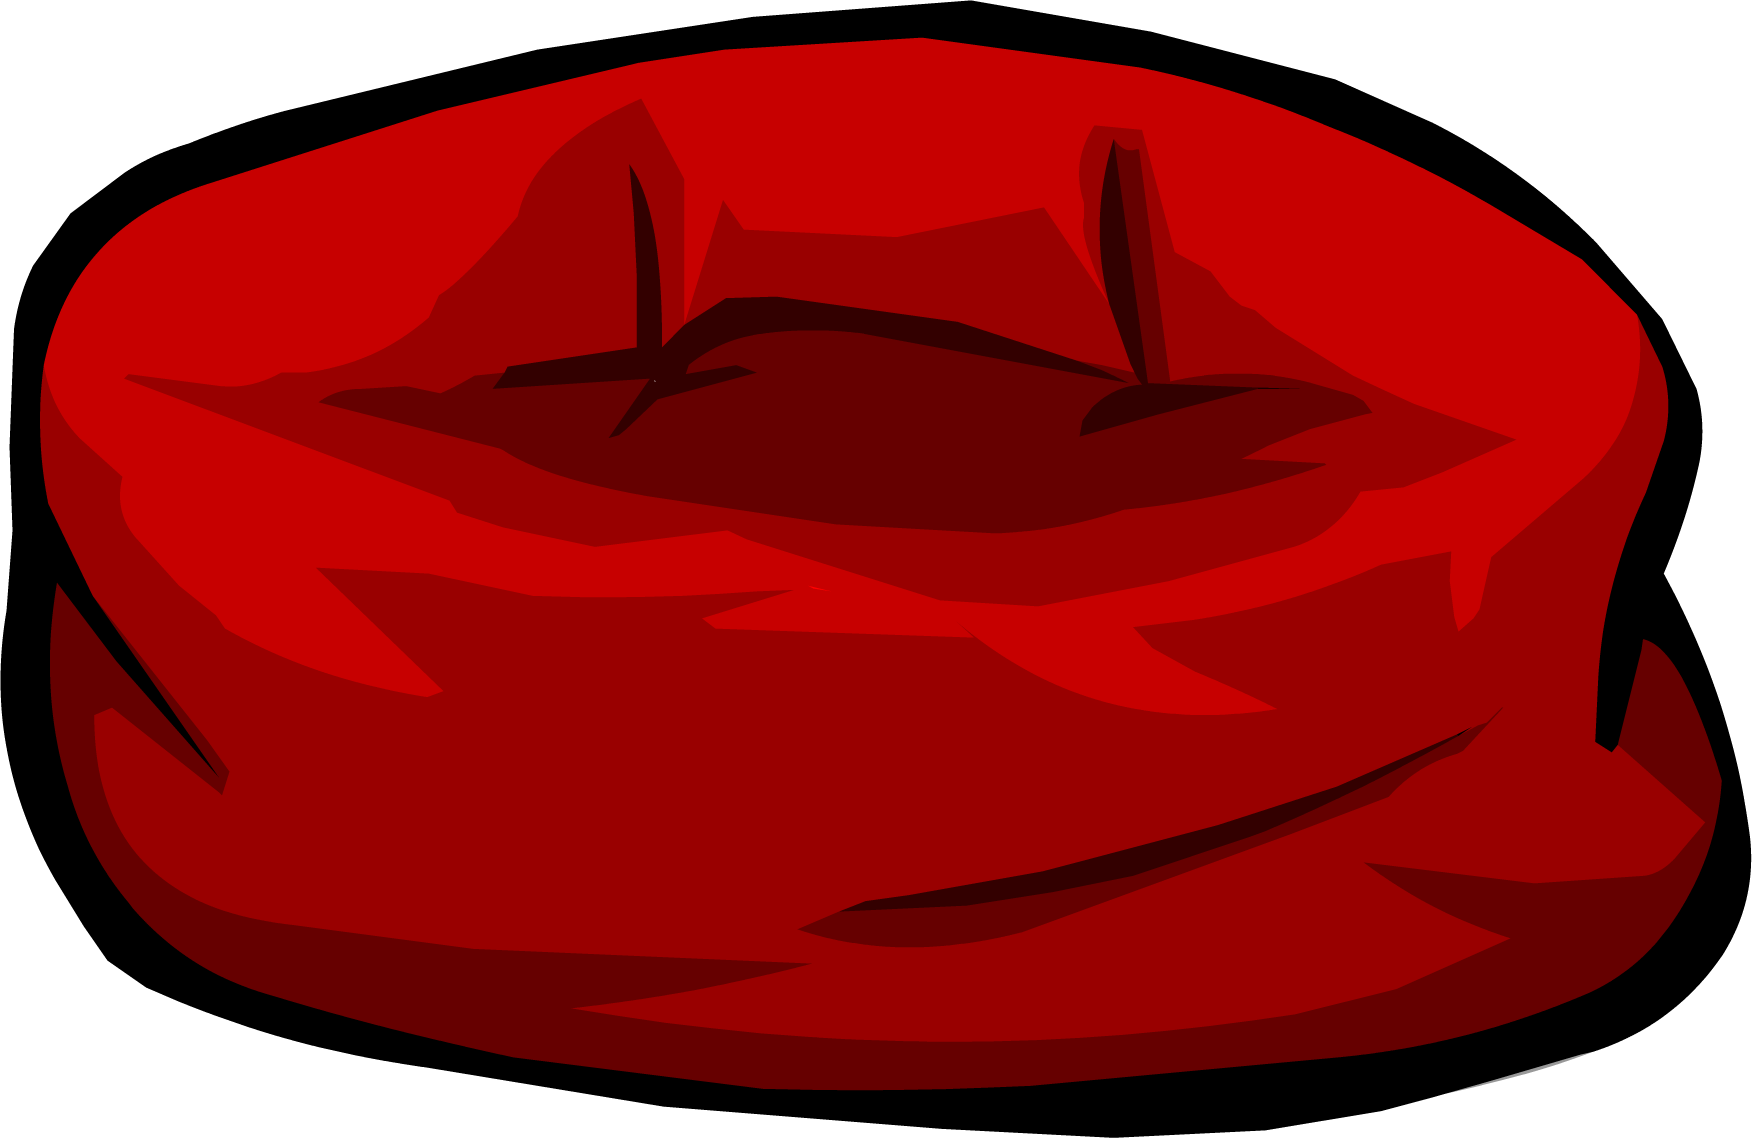 Bean Bag Chair Picture Download Free Image PNG Image